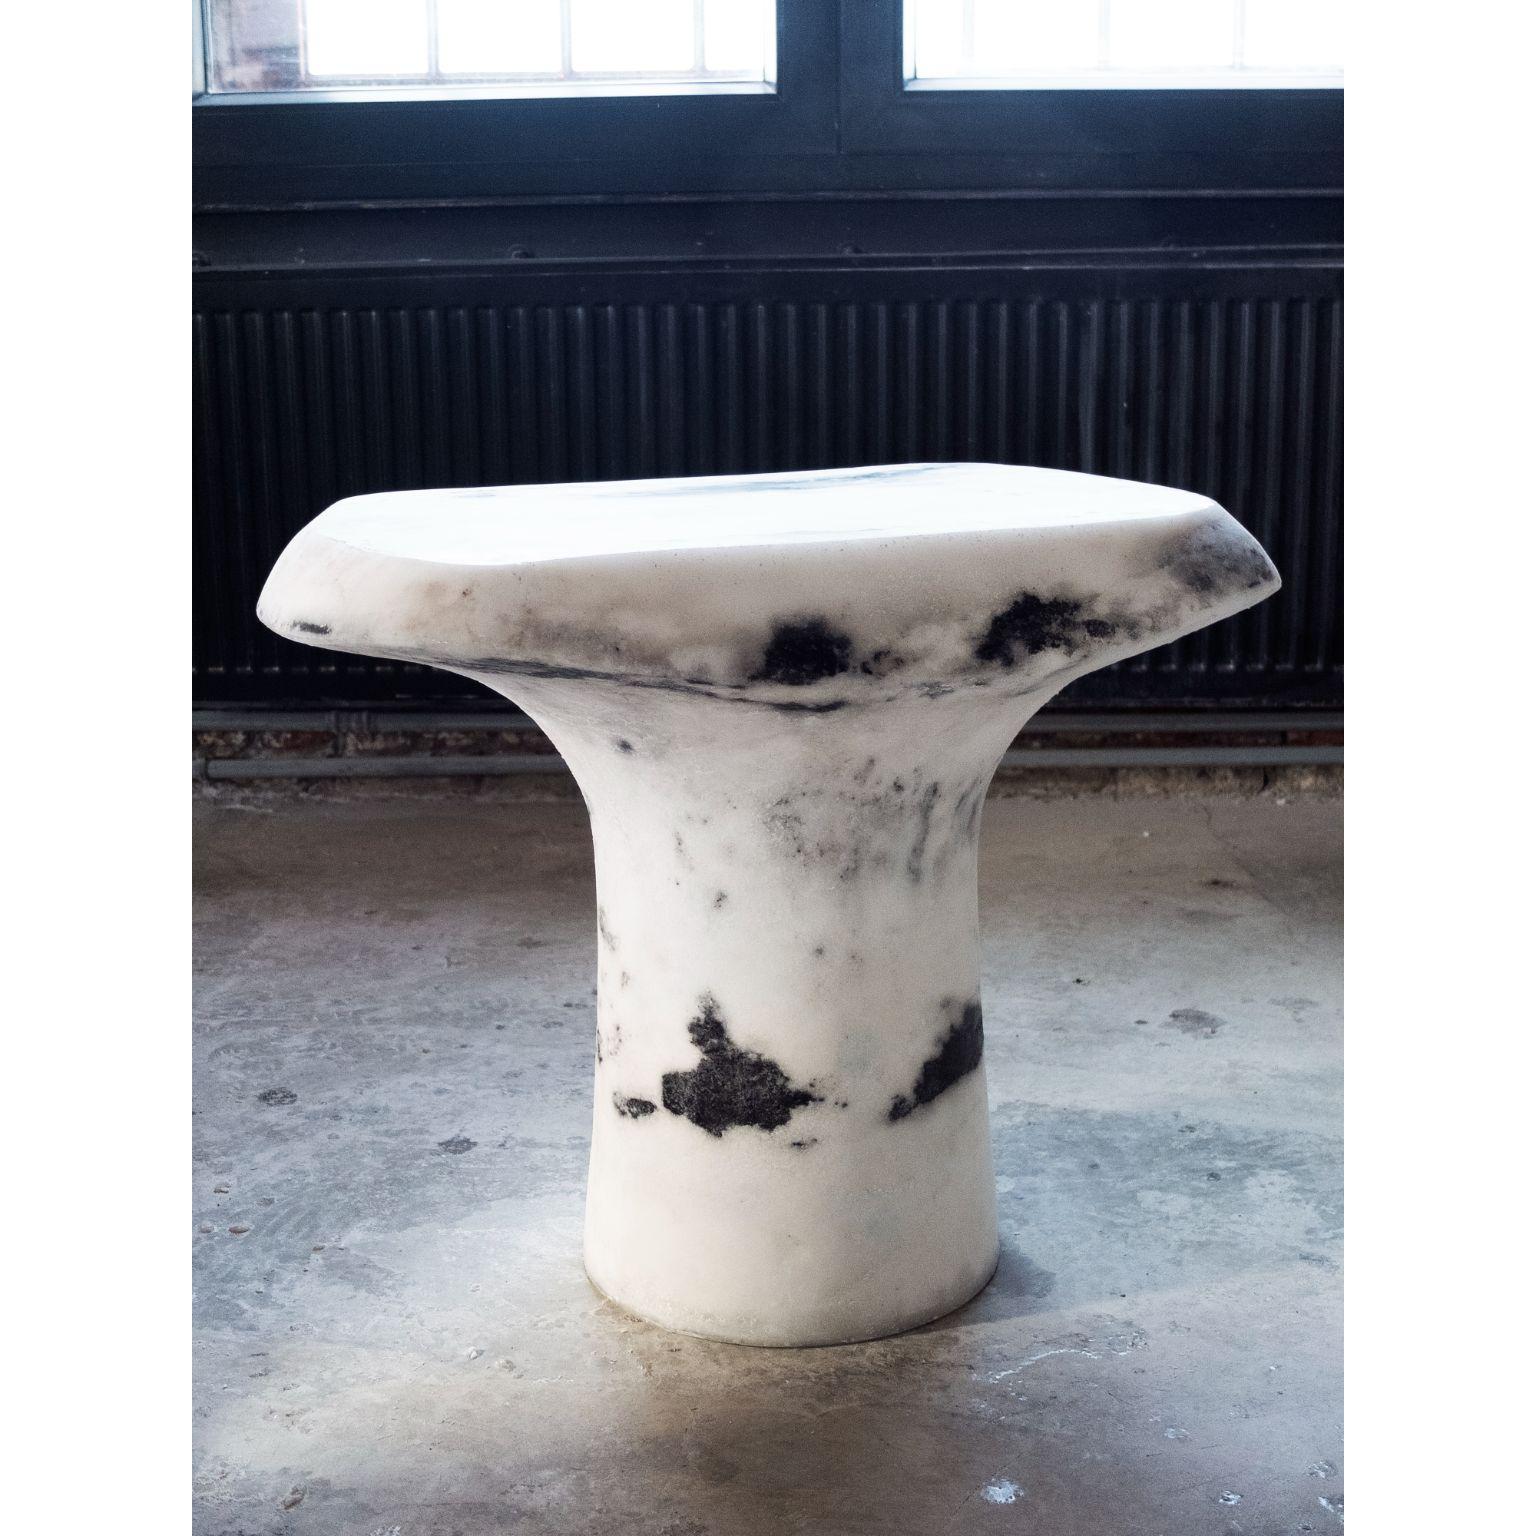 White T table by Roxane Lahidji
Dimensions: D 60 x W 40 x H 50 cm.
Materials: Marble salt.
Weight: 50 kg

Roxane Lahidji is a social designer specializing in ecological material developments and applications. Her research focuses on achieving